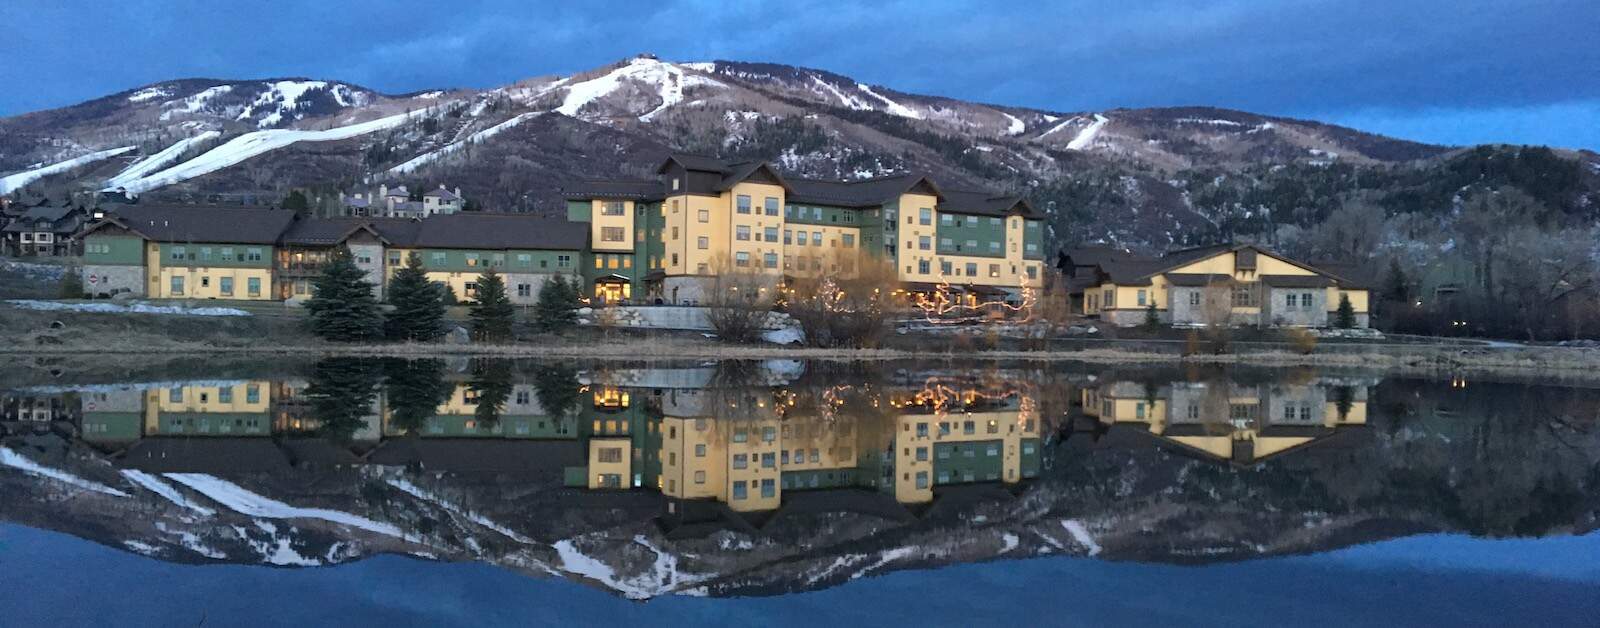 are there casinos in steamboat springs co